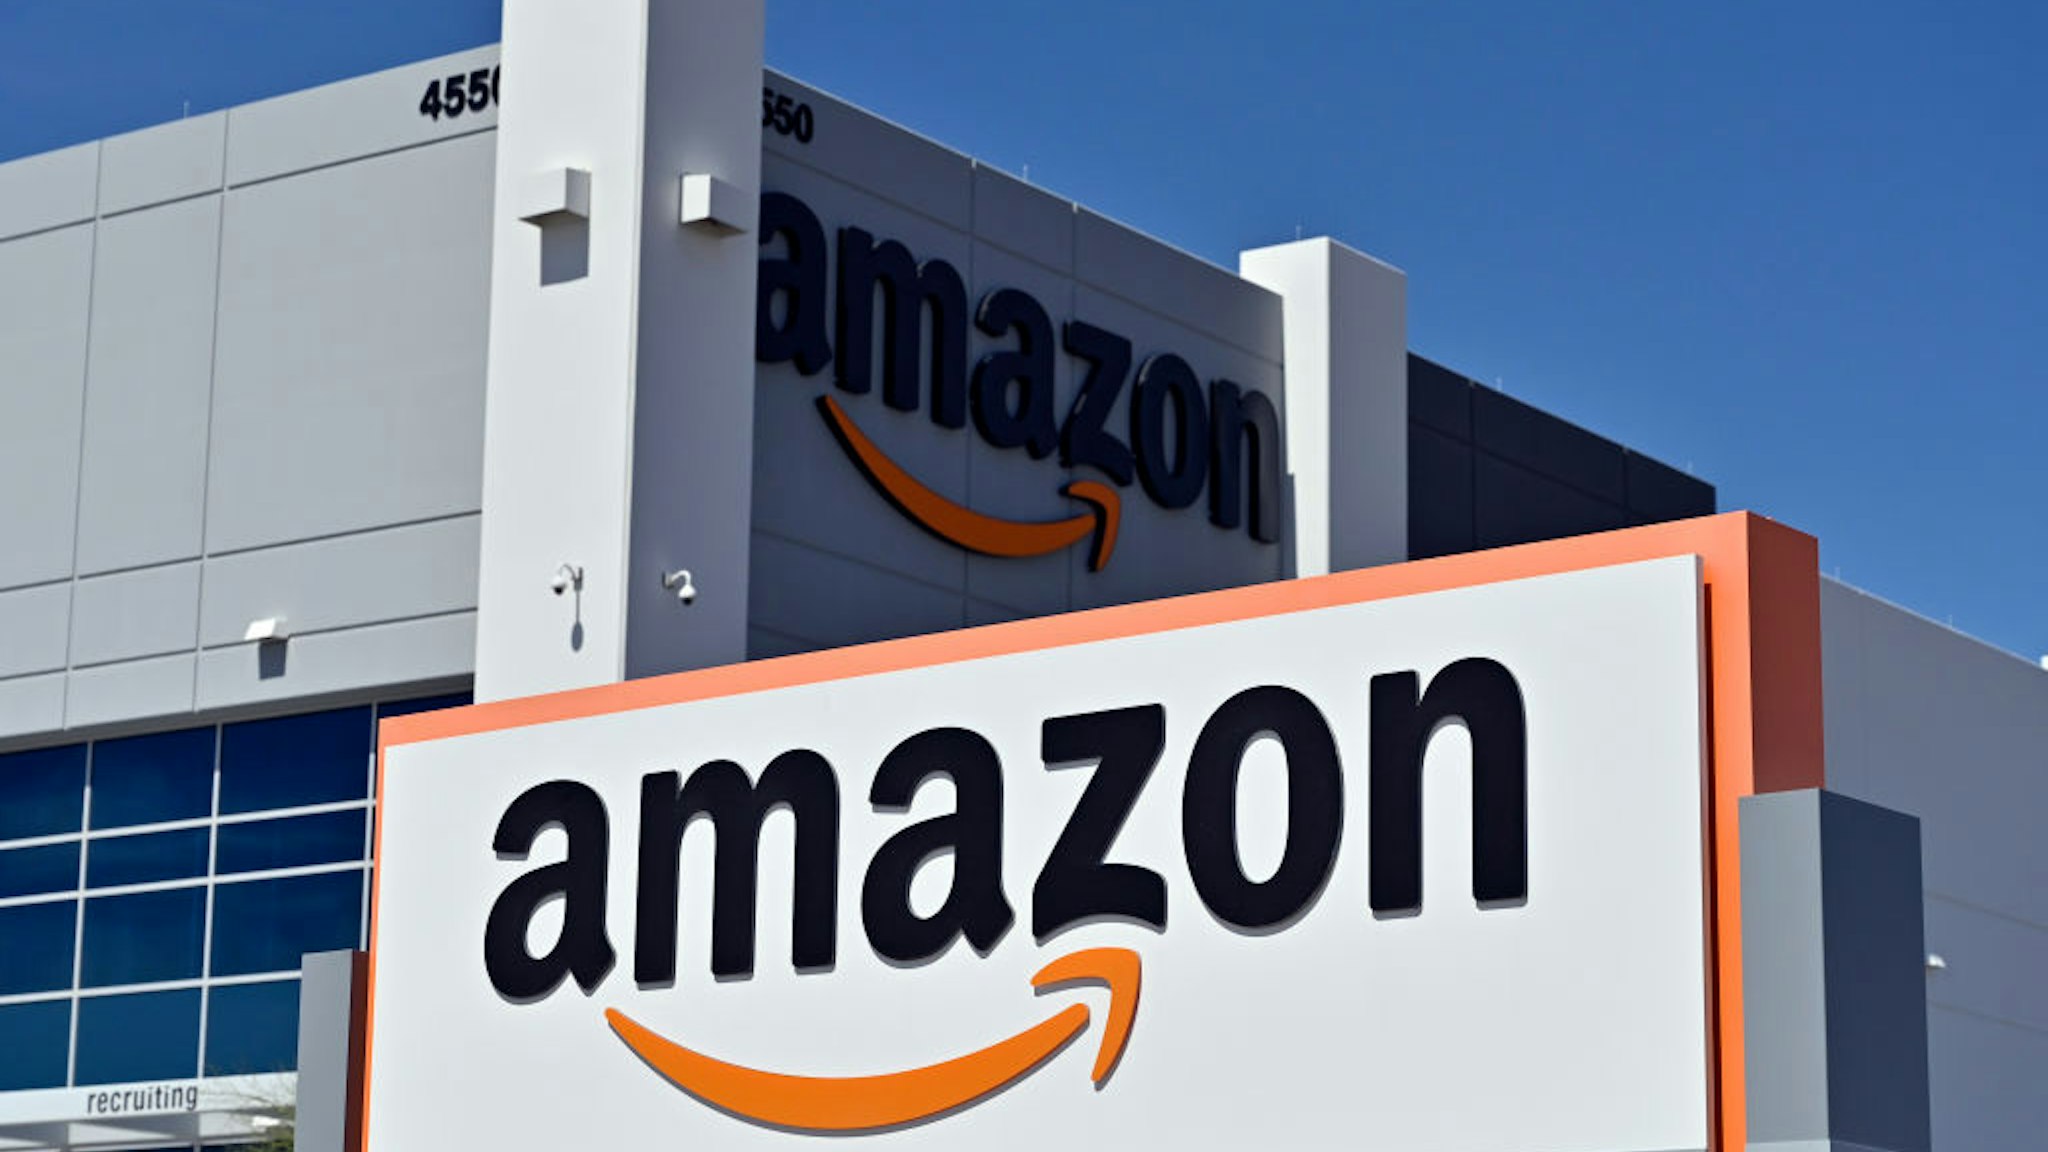 An Amazon distribution center is seen as the coronavirus continues to spread across the United States, on April 25, 2020 in North Las Vegas, Nevada. - Nevada Gov. Steve Sisolak ordered a mandatory shutdown of nonessential businesses, including all casinos, in the state through at least April 30, 2020 to help combat the spread of the virus. The World Health Organization declared the coronavirus (COVID-19) a global pandemic on March 11th.